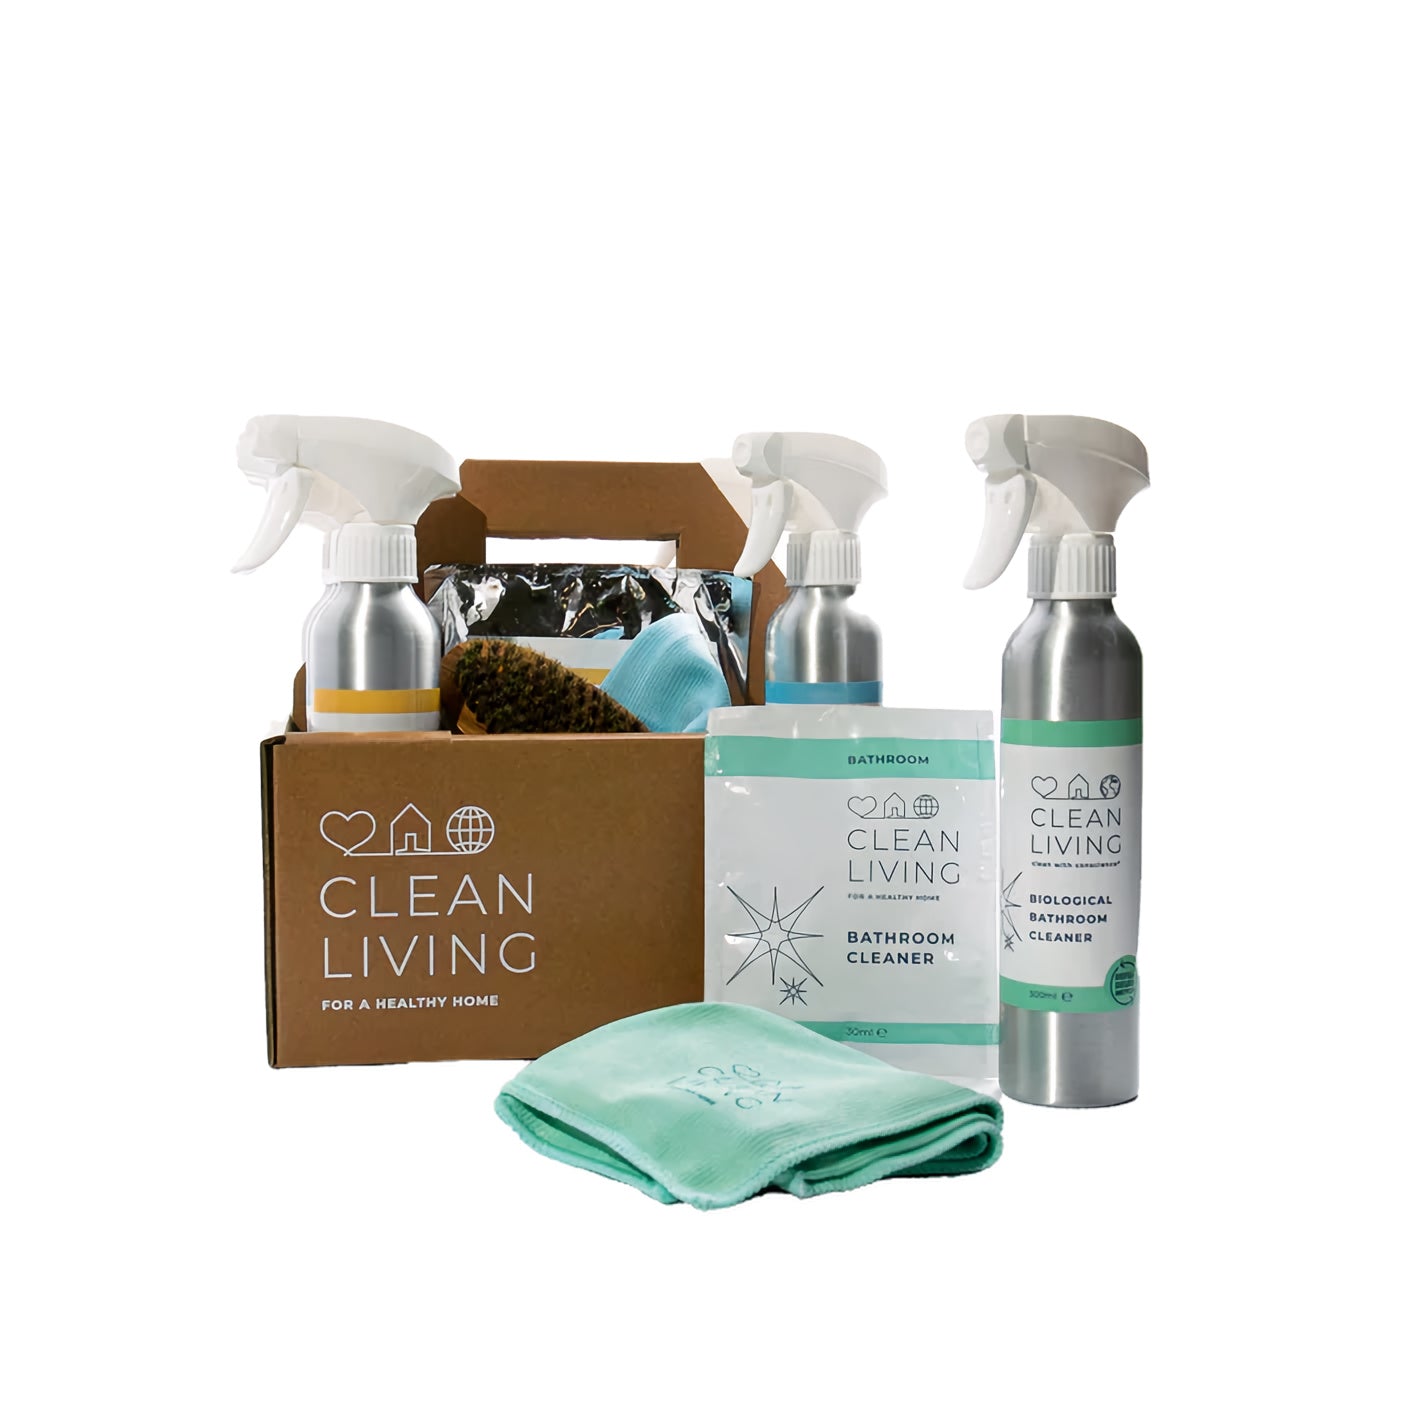 media-/product/living/cleaning/